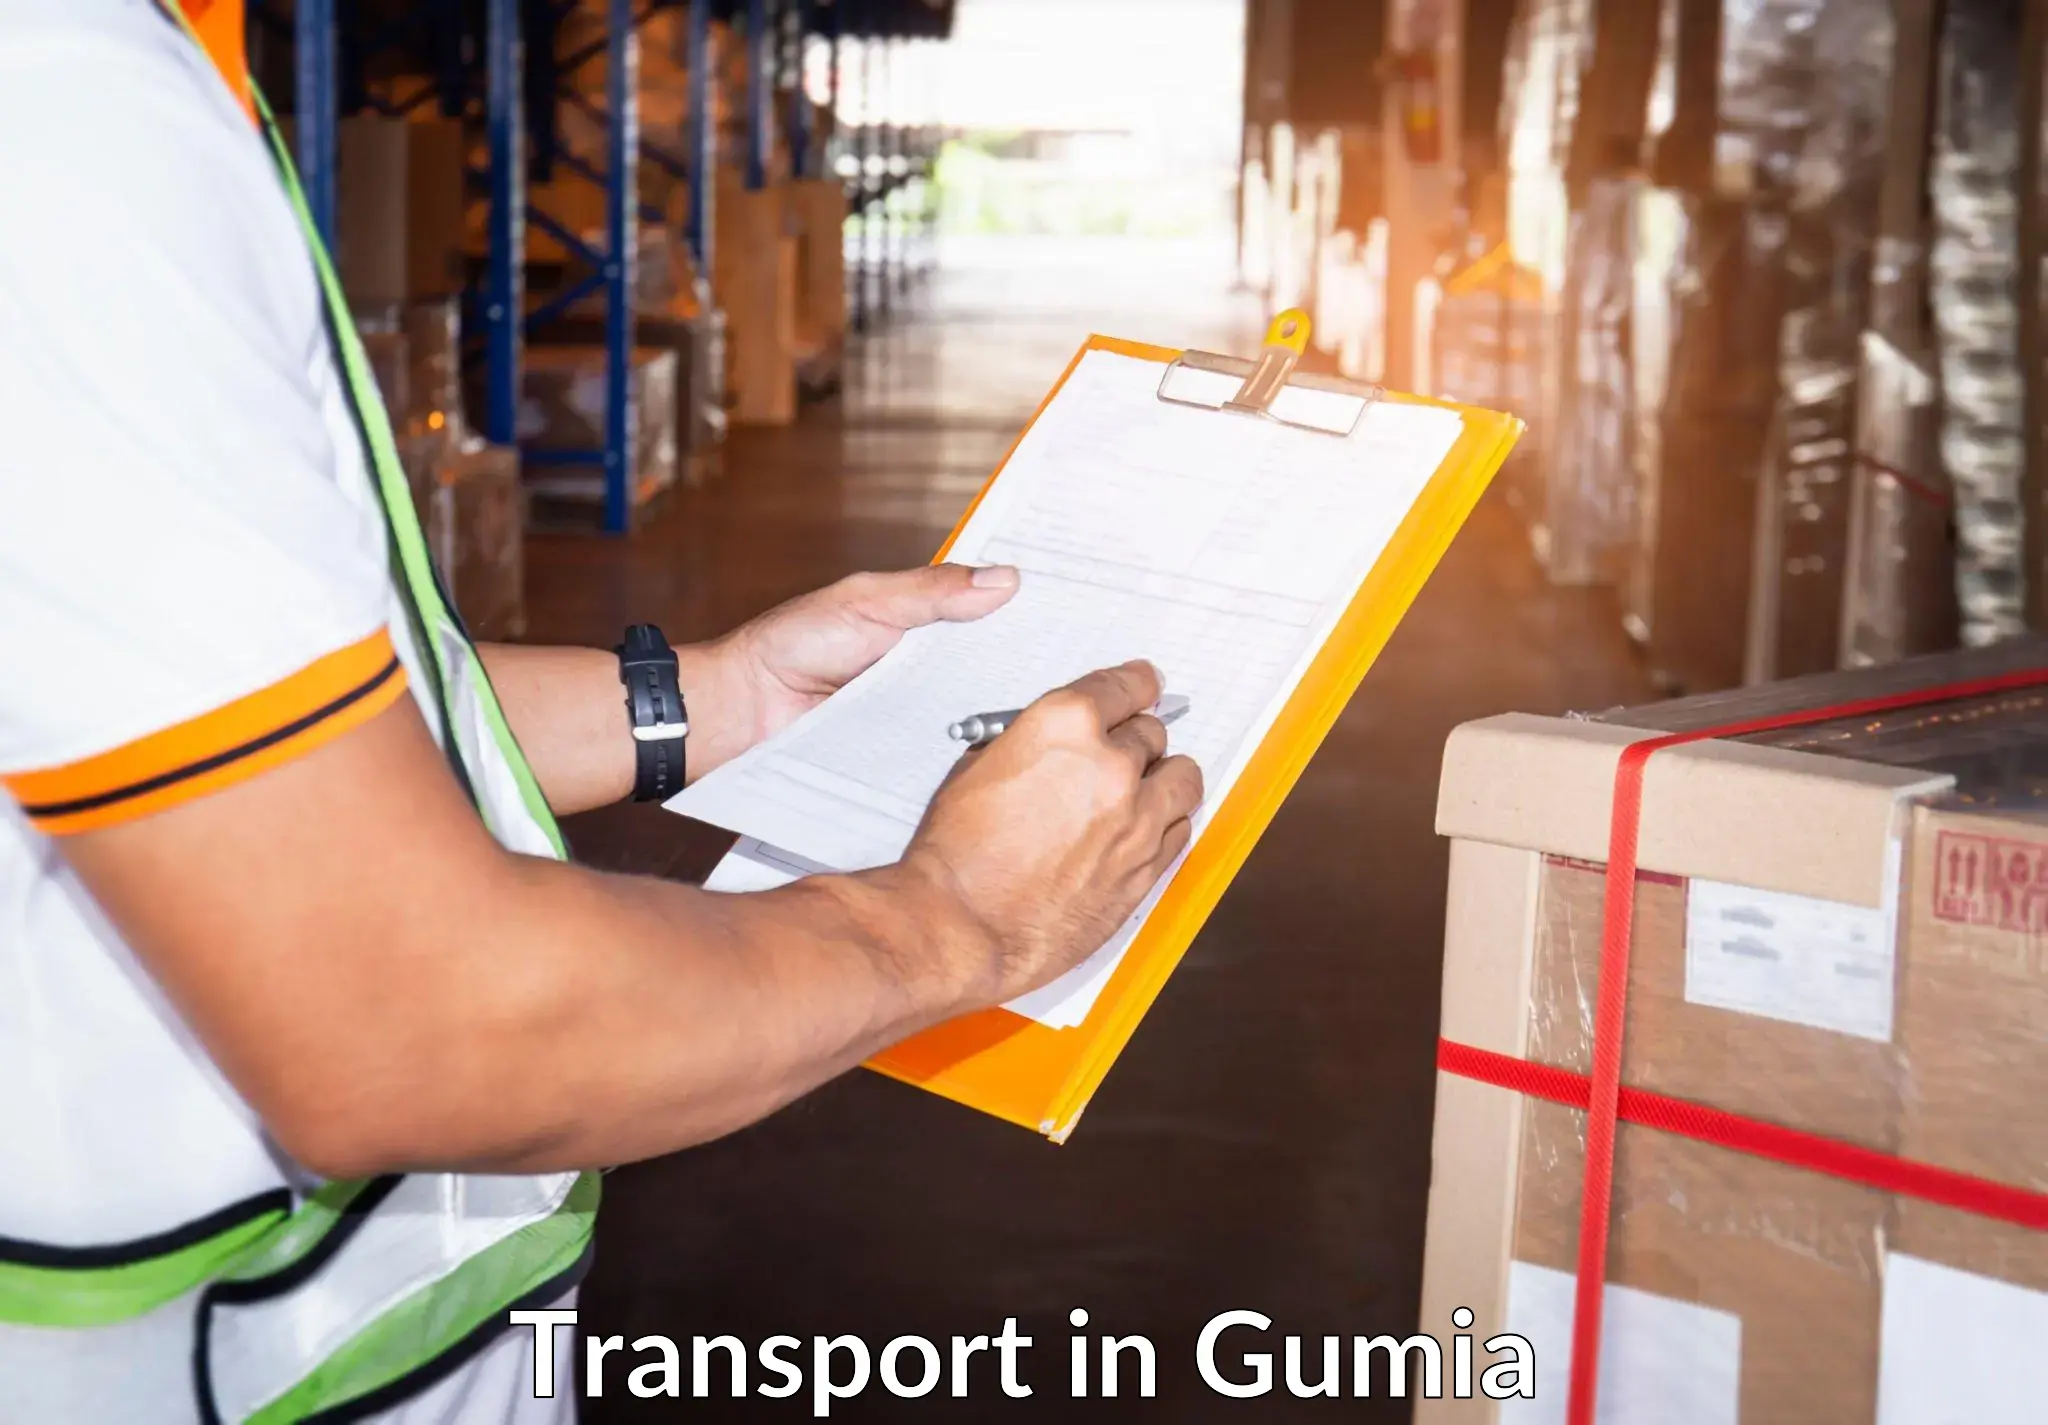 Daily parcel service transport in Gumia